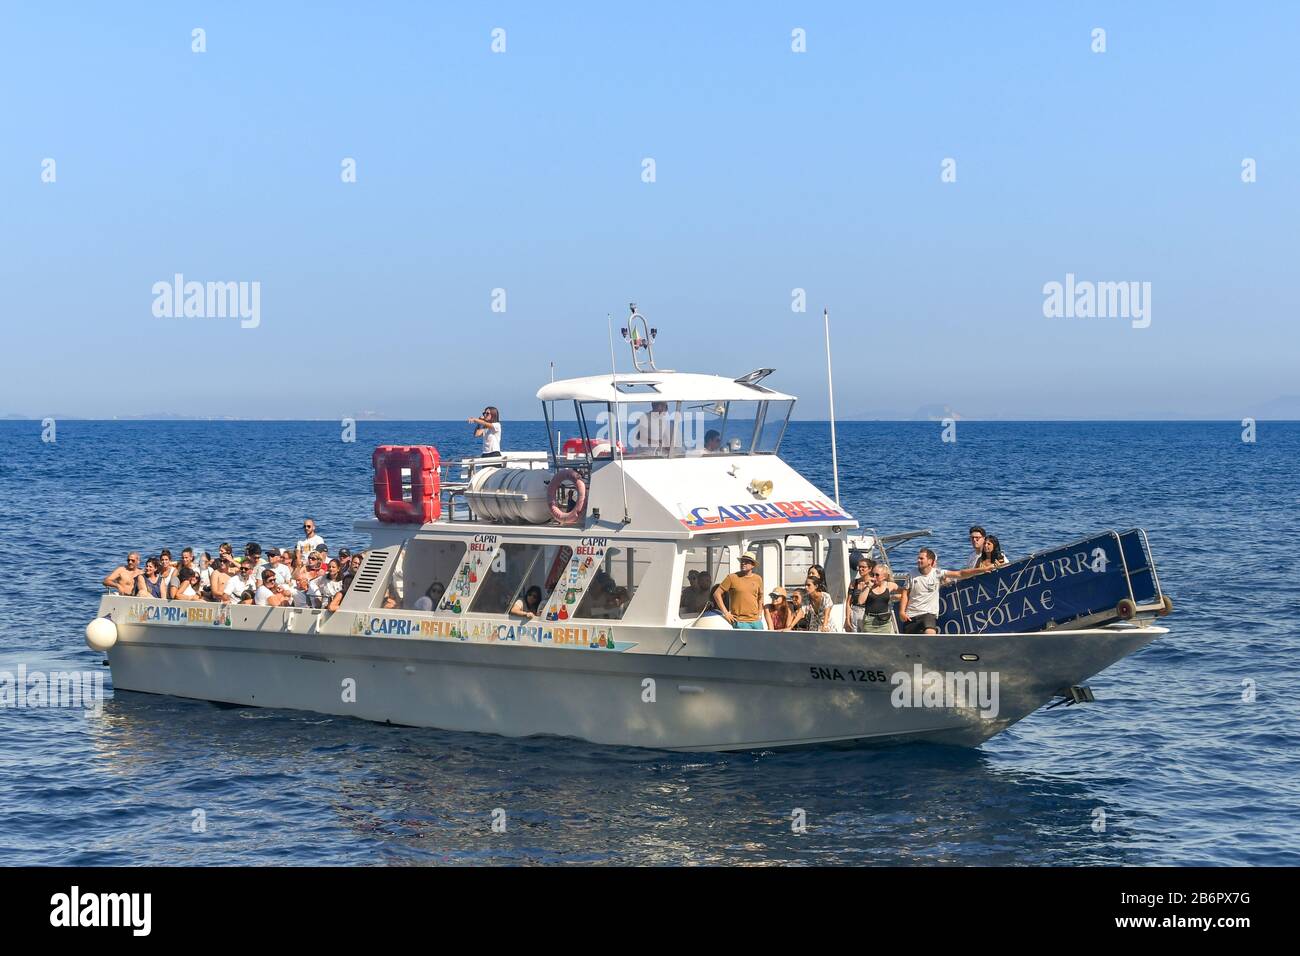 ISLE OF CAPRI, ITALY - AUGUST 2019: Group of people on board a motor boat on a tourist excursion around the Isle of Capri. Stock Photo